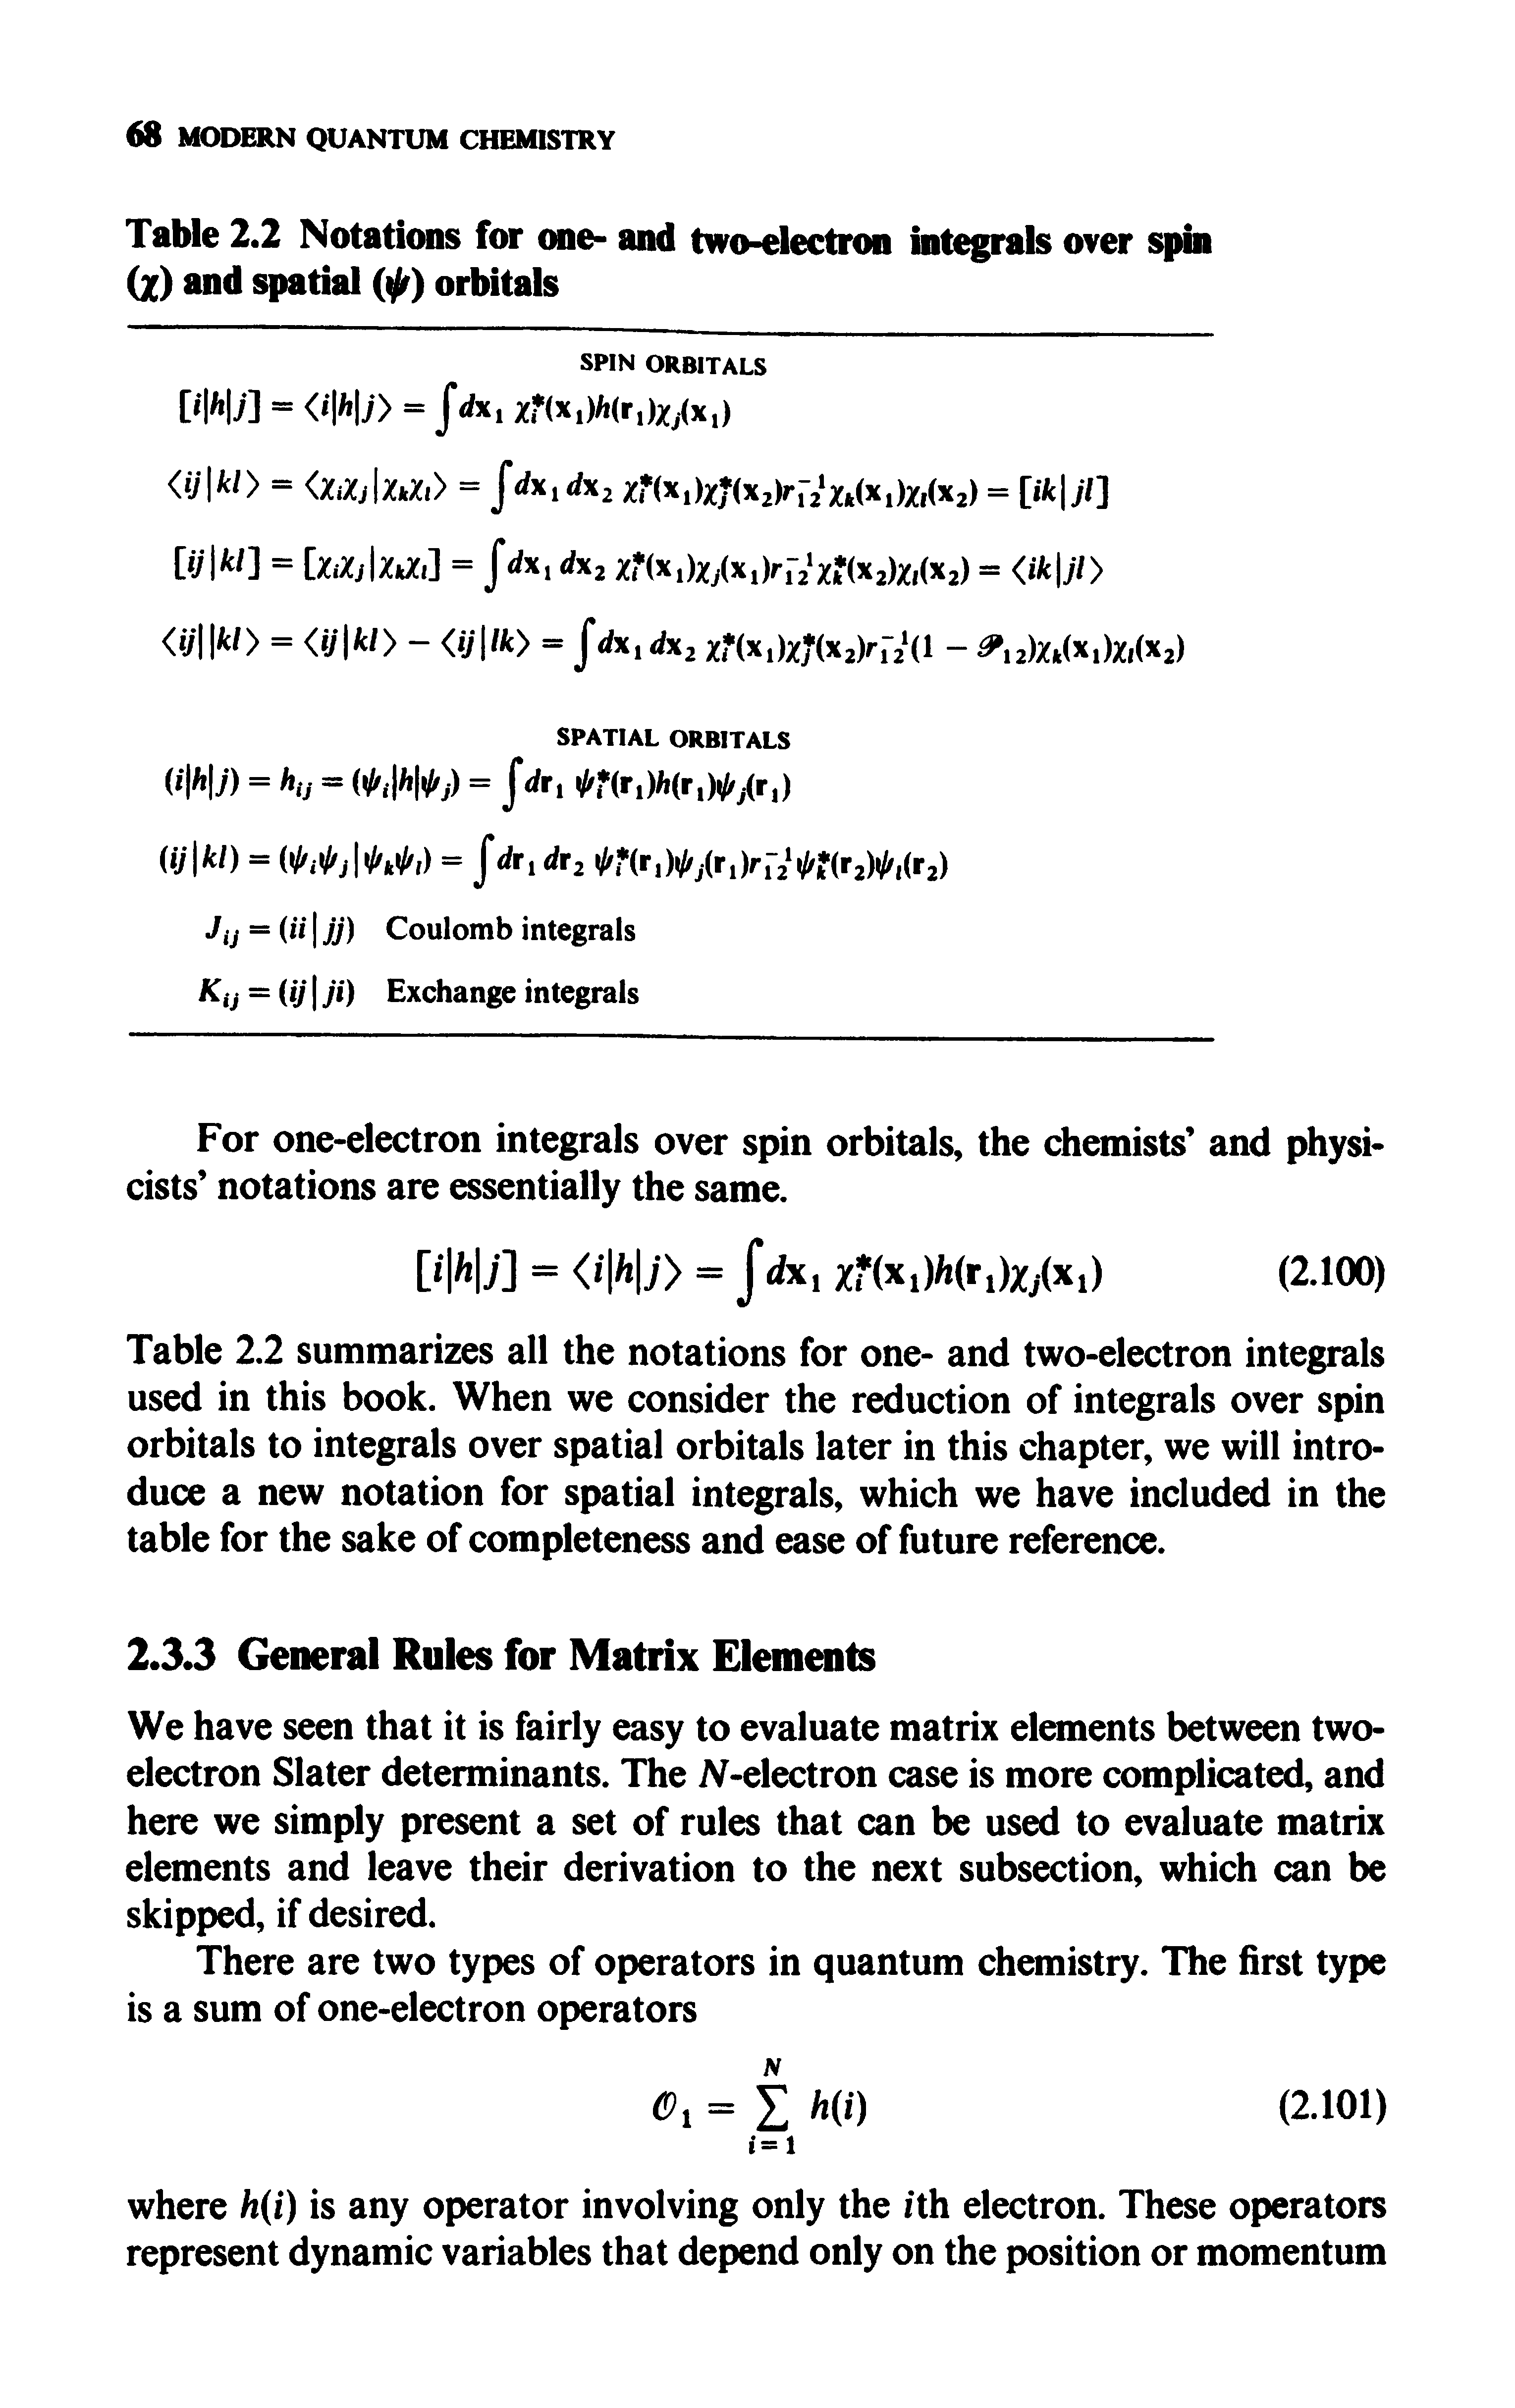 Table 2.2 Notations for one- and two-dectron integrals over spin (Z) and spatial ( ) orbitals...